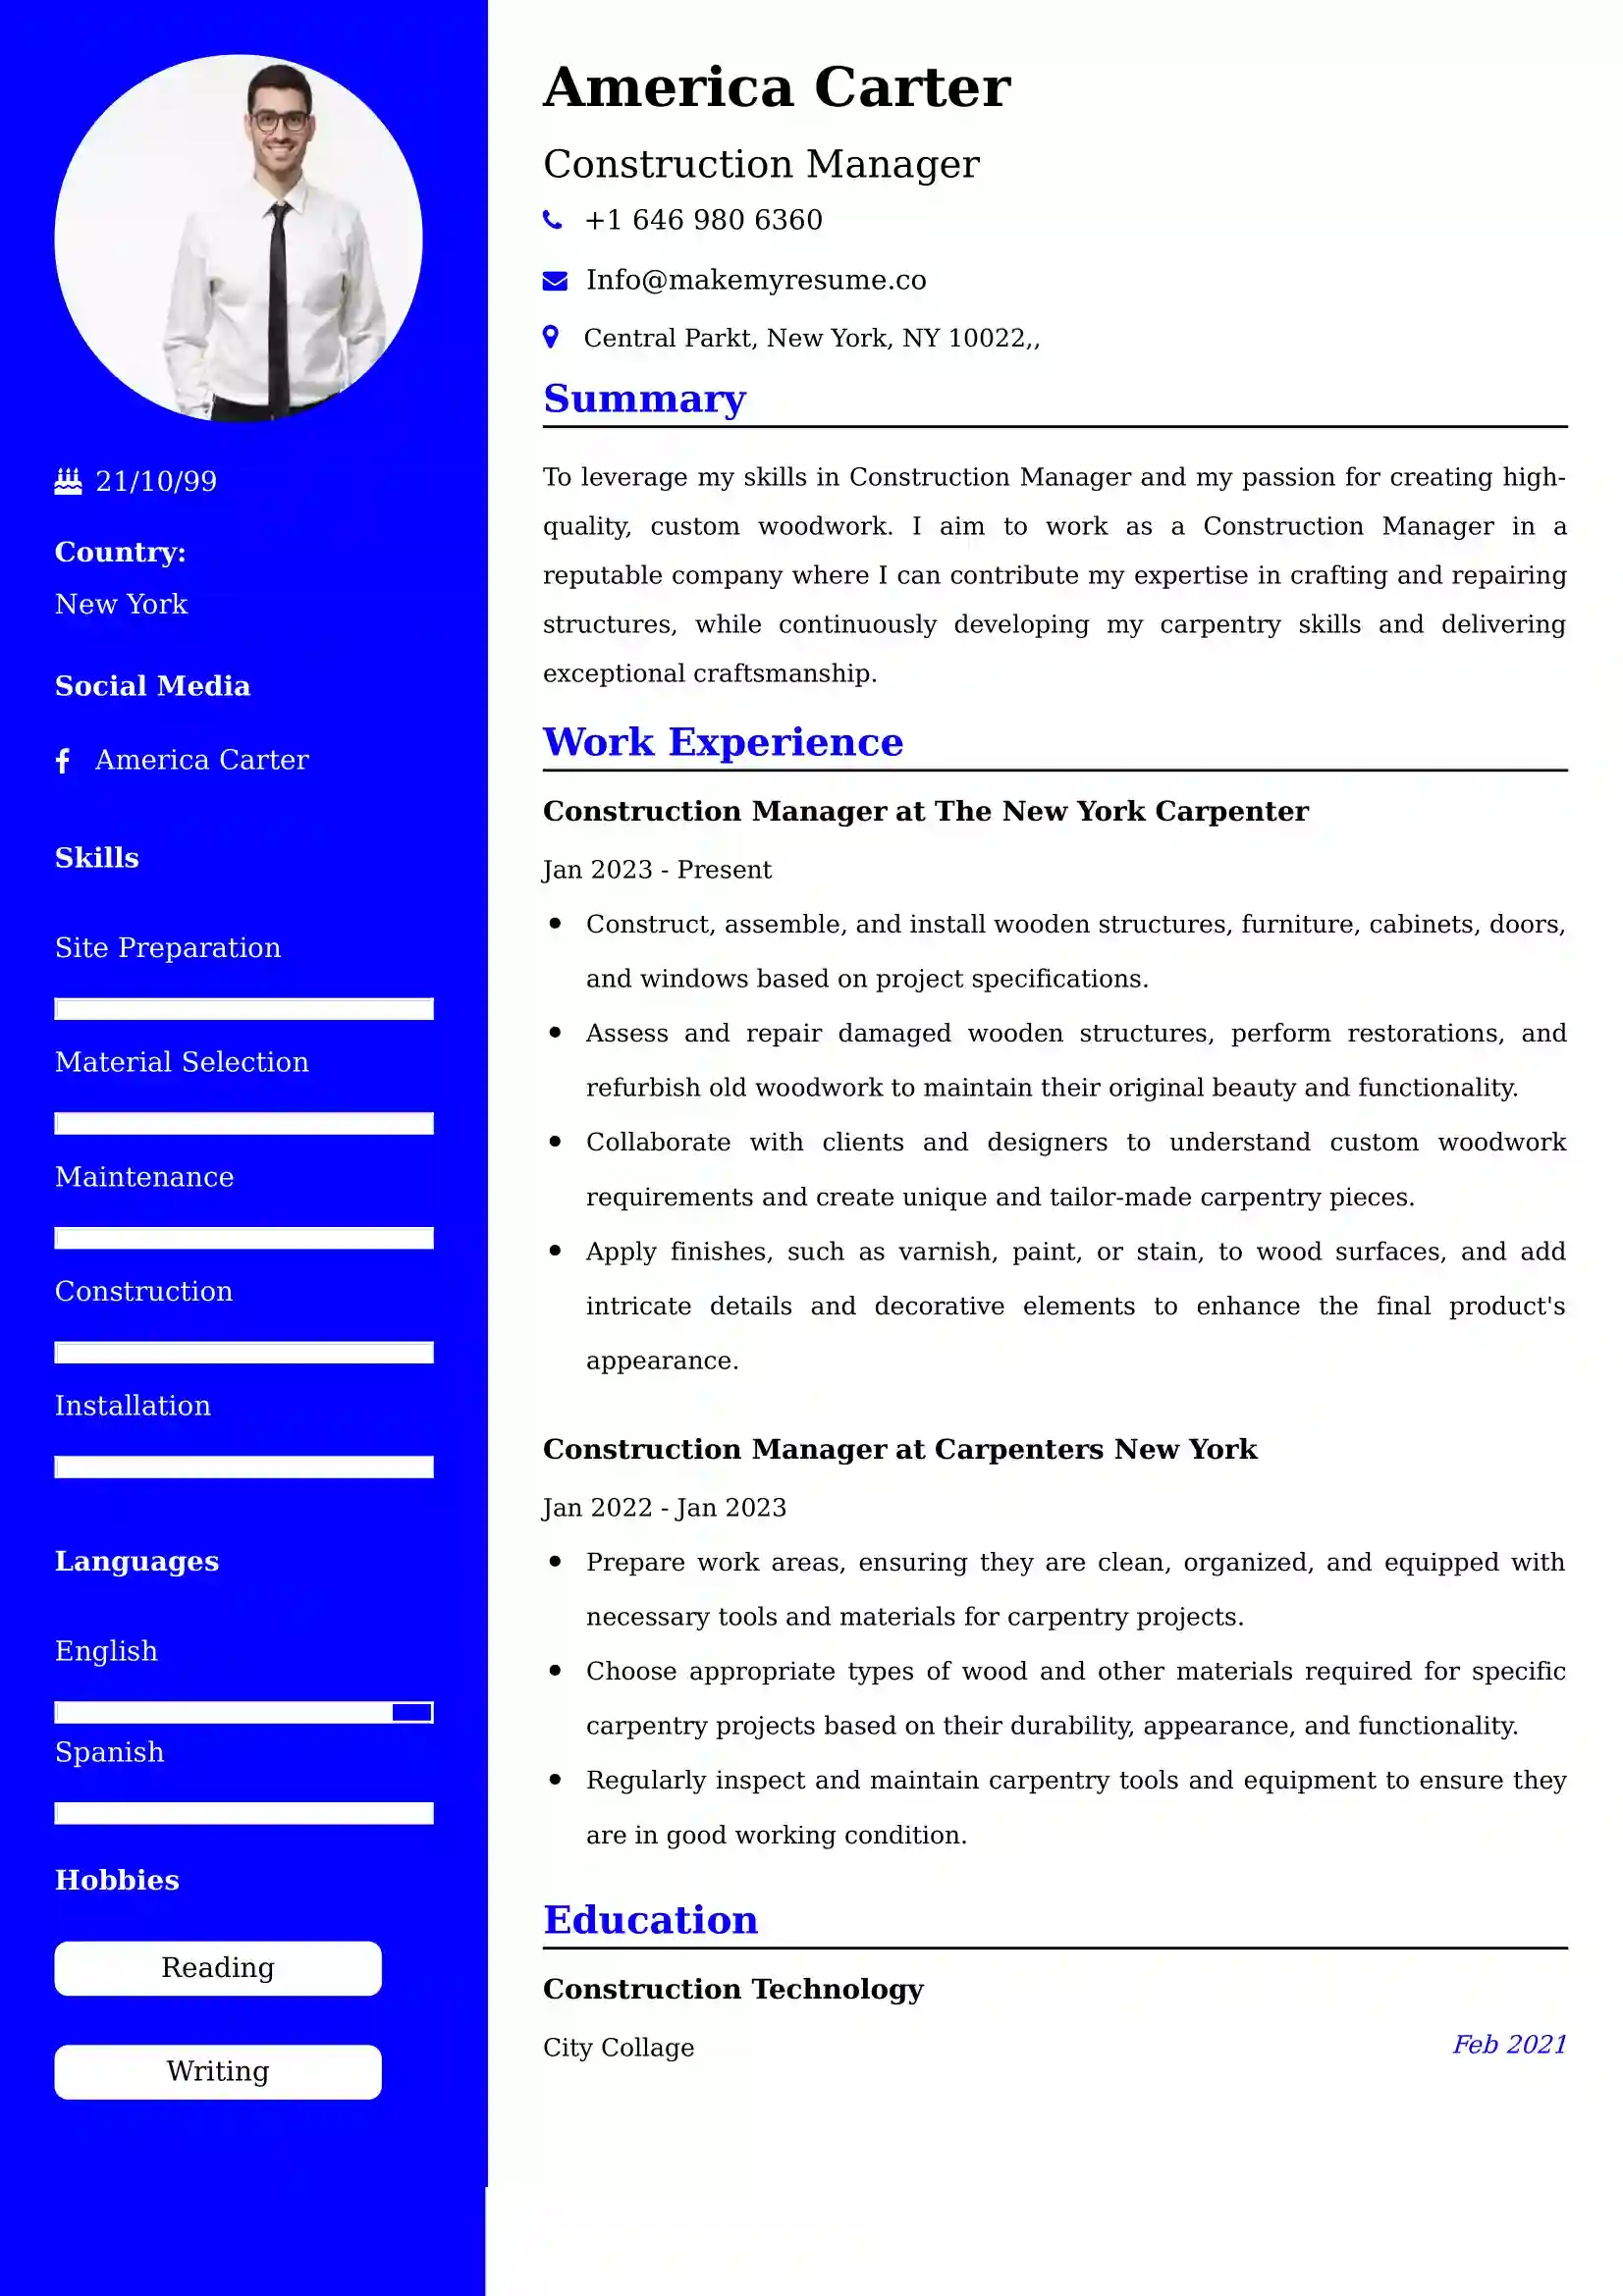 Construction Manager Resume Examples - UK Format, Latest Template.